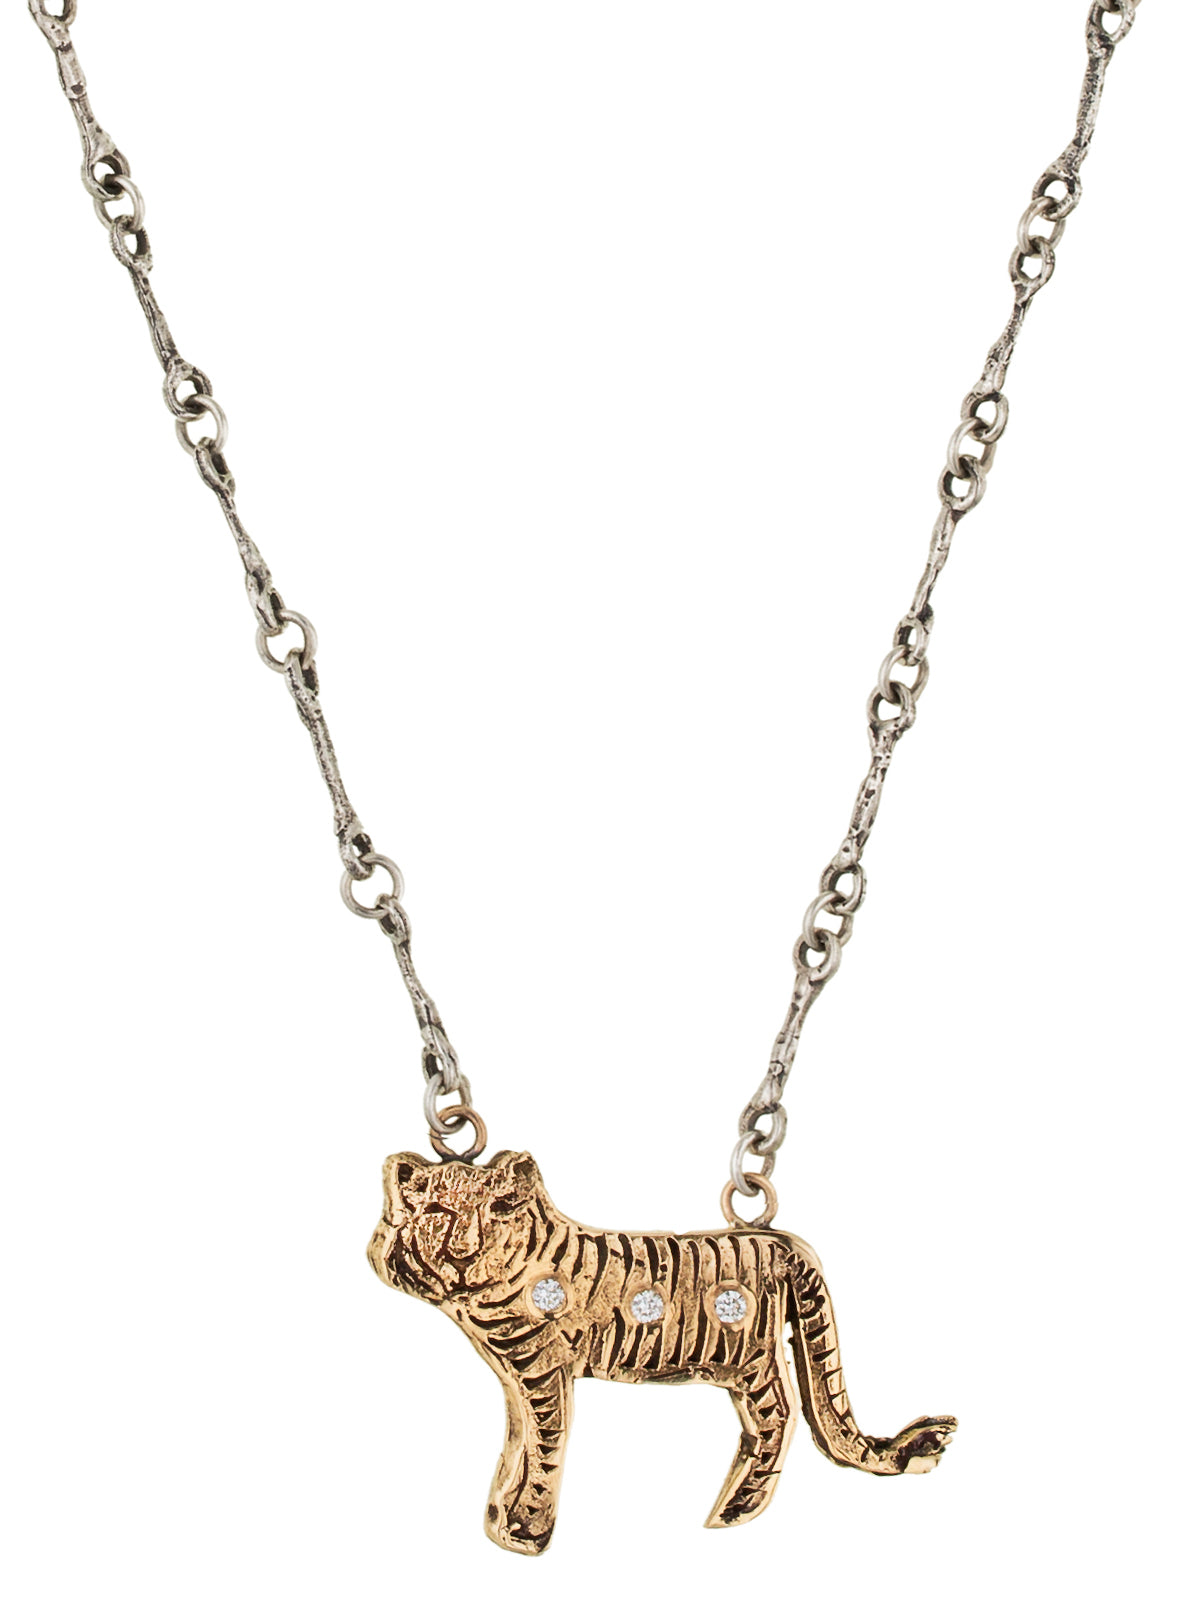 Spirit of the Tiger Necklace